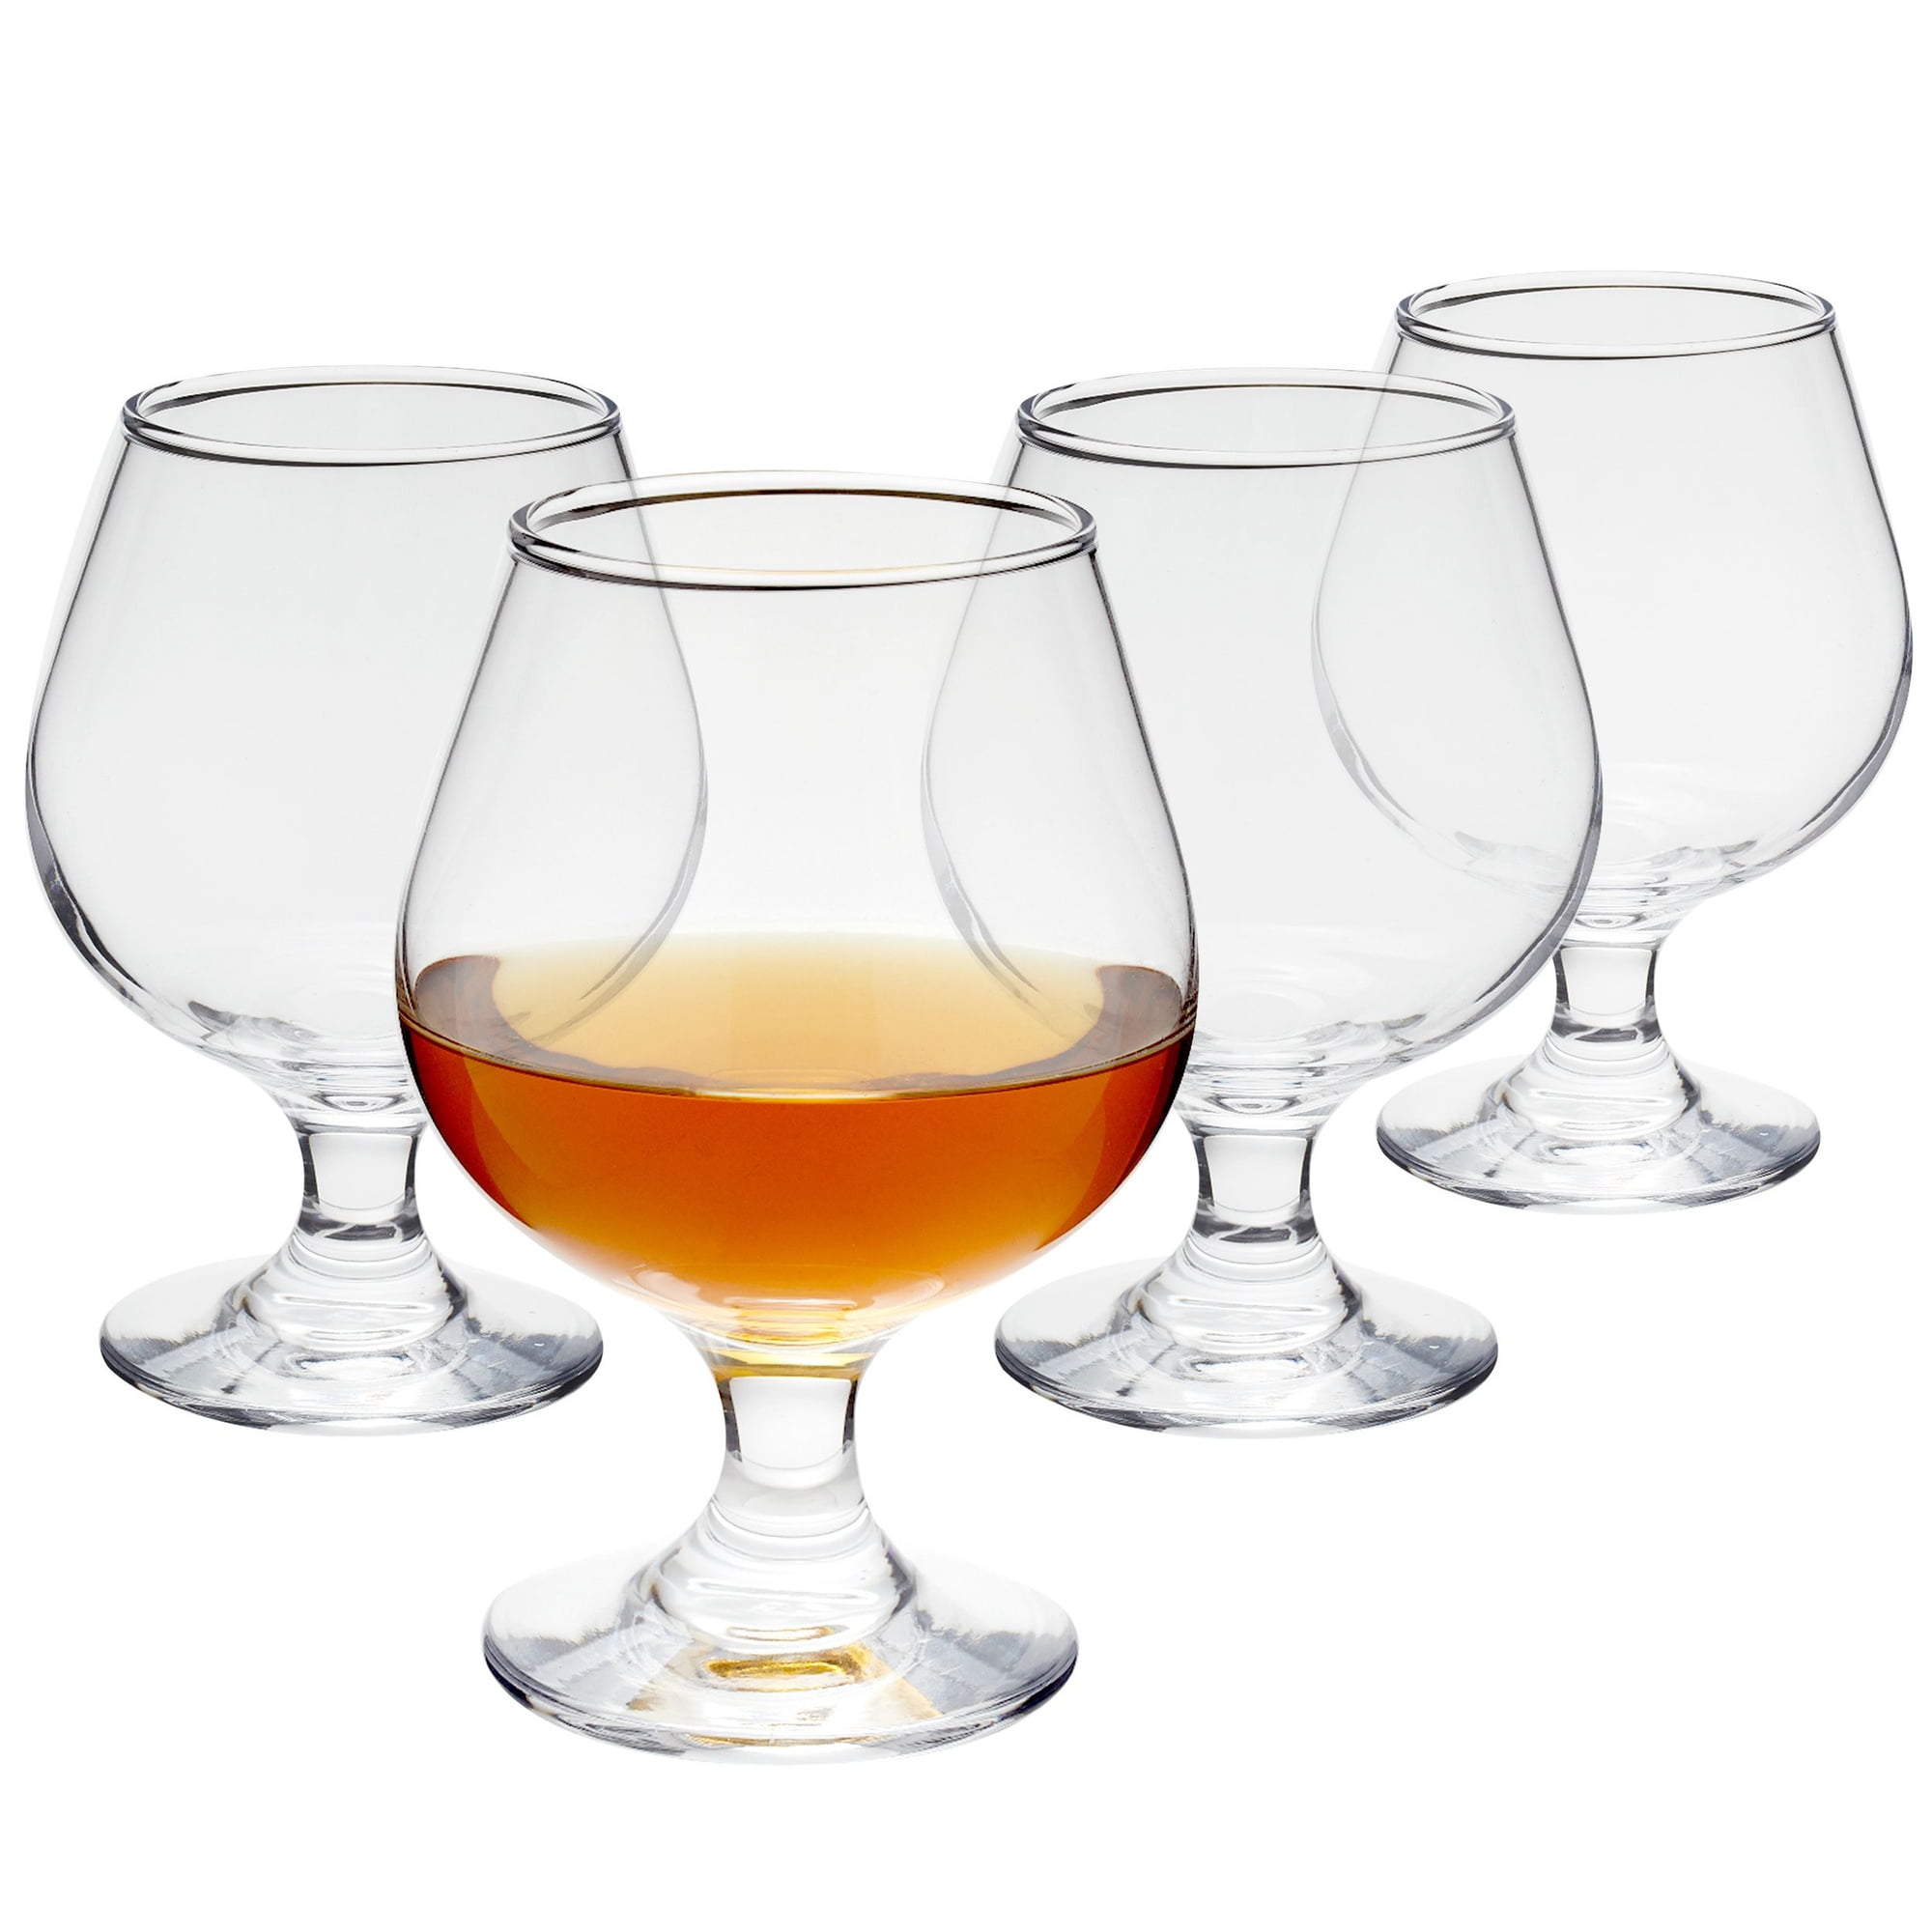 GLASSIQUE CADEAU Cognac, Brandy, Tequila and Dessert Wine Snifter Glasses |  Set of 4 Small Tasting T…See more GLASSIQUE CADEAU Cognac, Brandy, Tequila